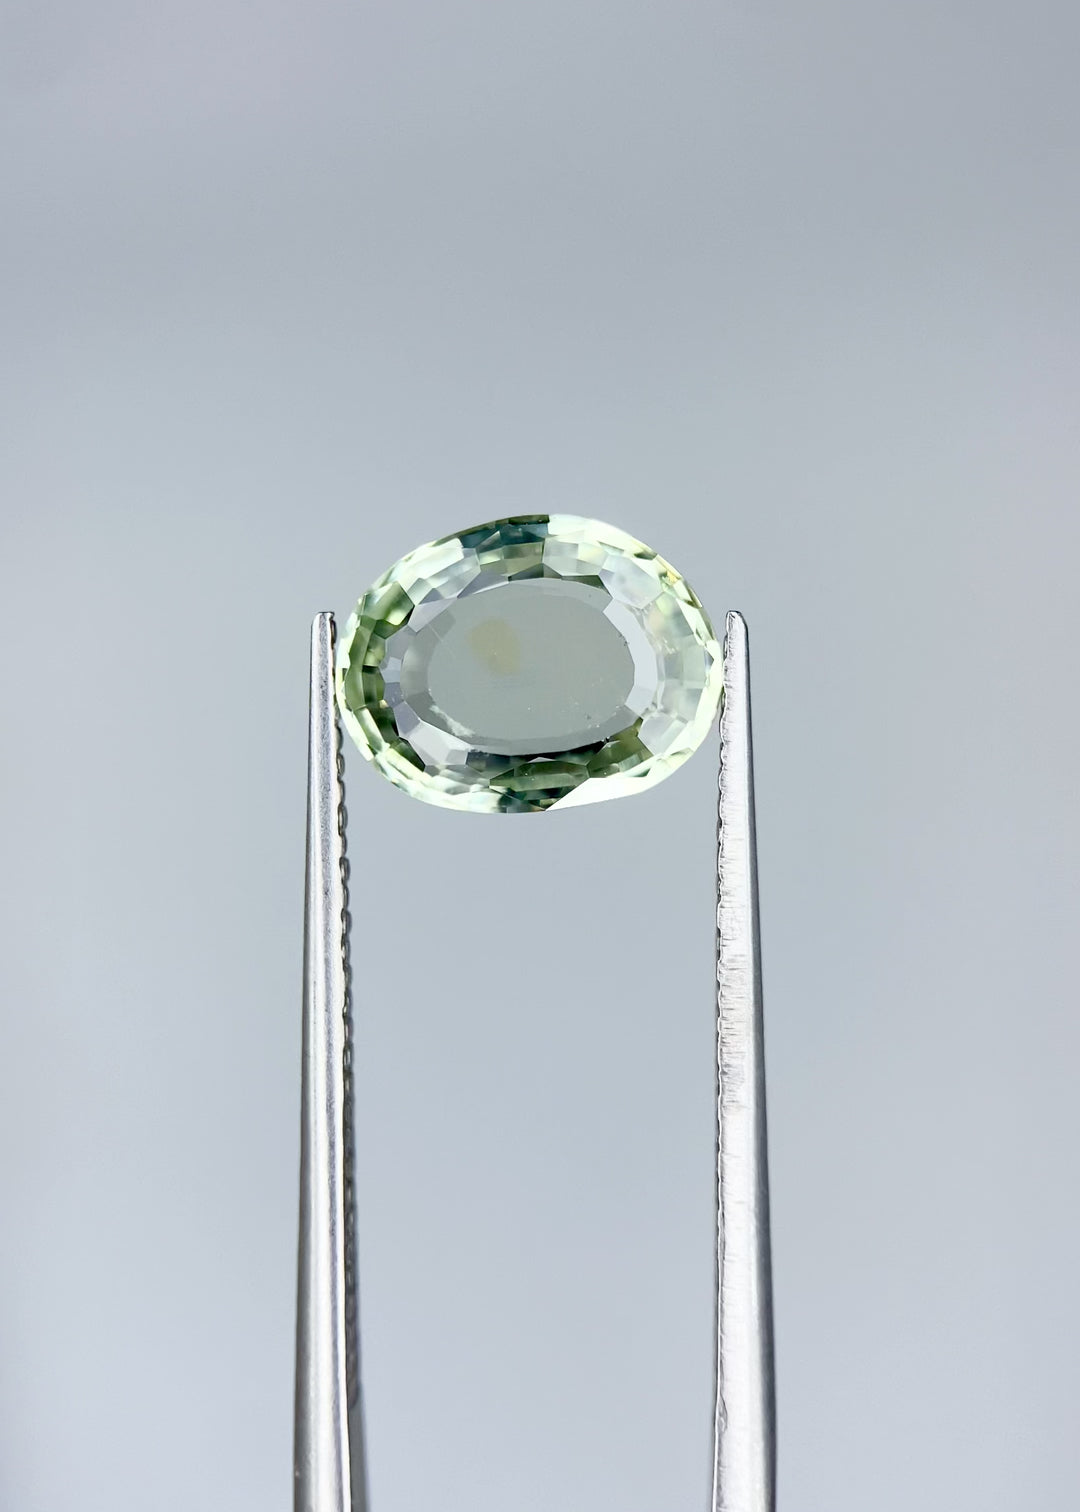 Woodland Green Looking Glass - 2.135ct